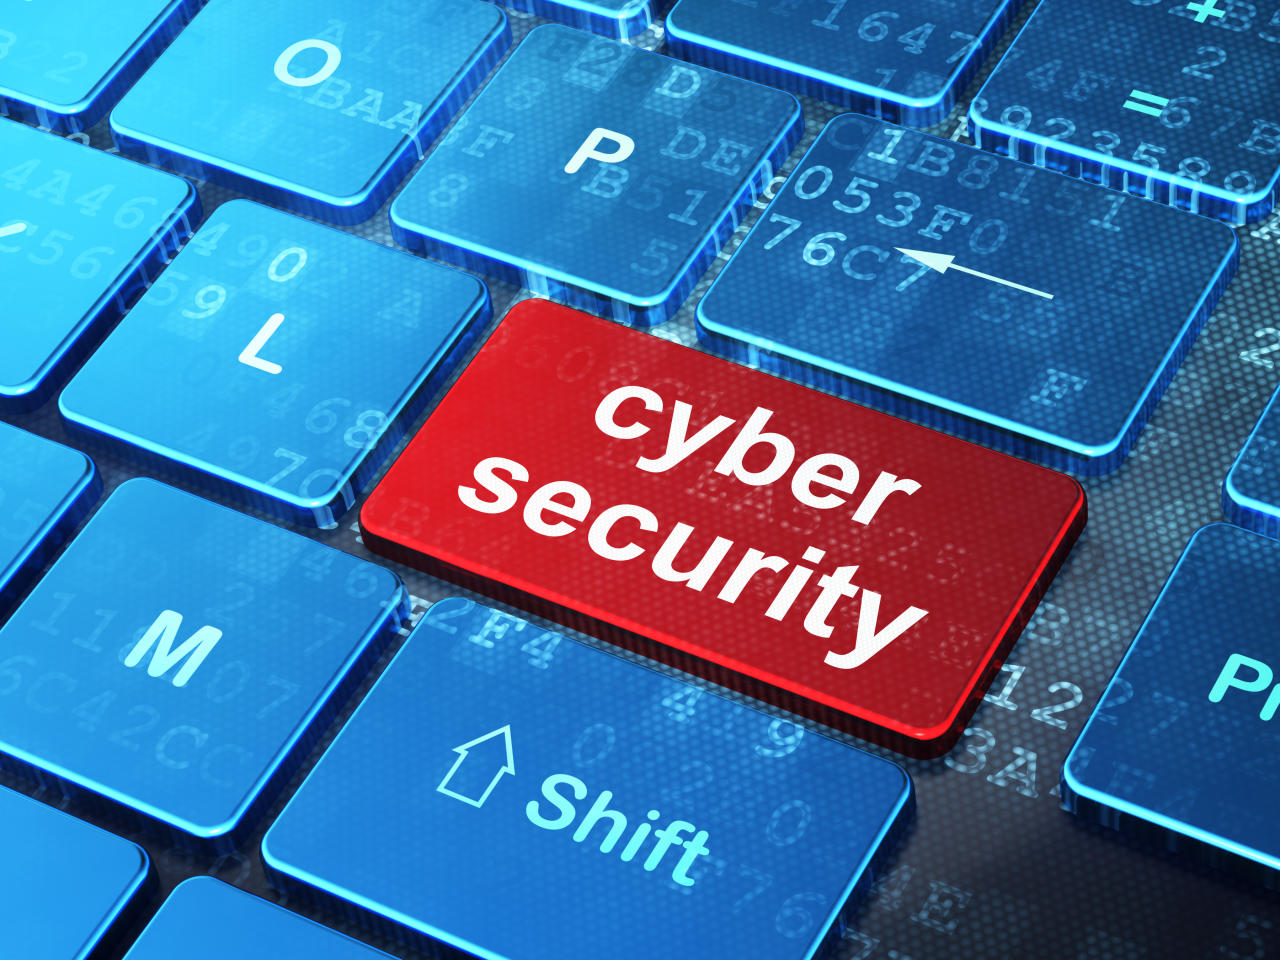 Cybersecurity training to be held for Azerbaijan's industrial enterprises' staff